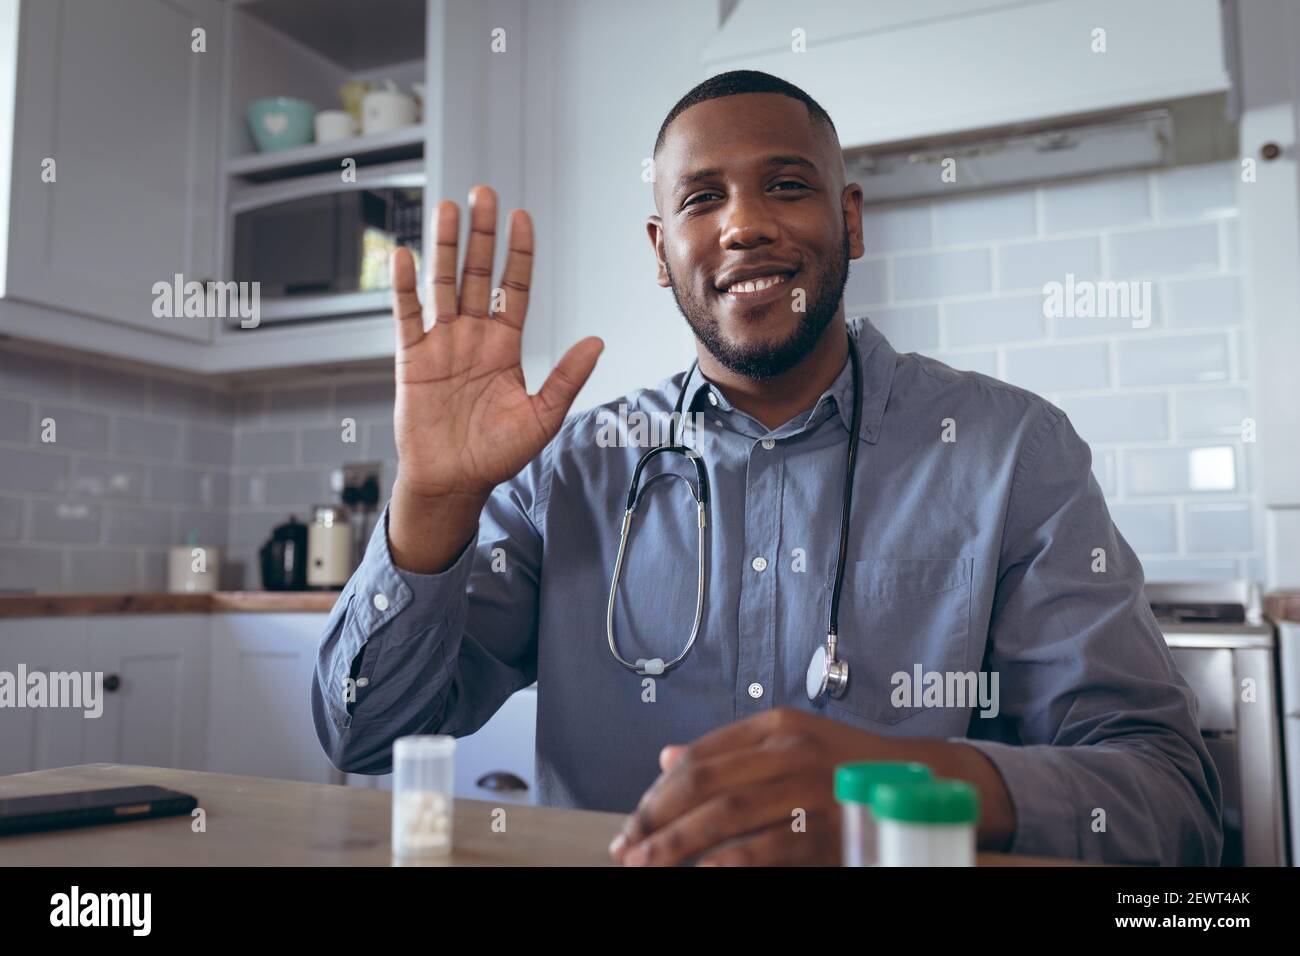 African american male doctor having a video chat Stock Photo